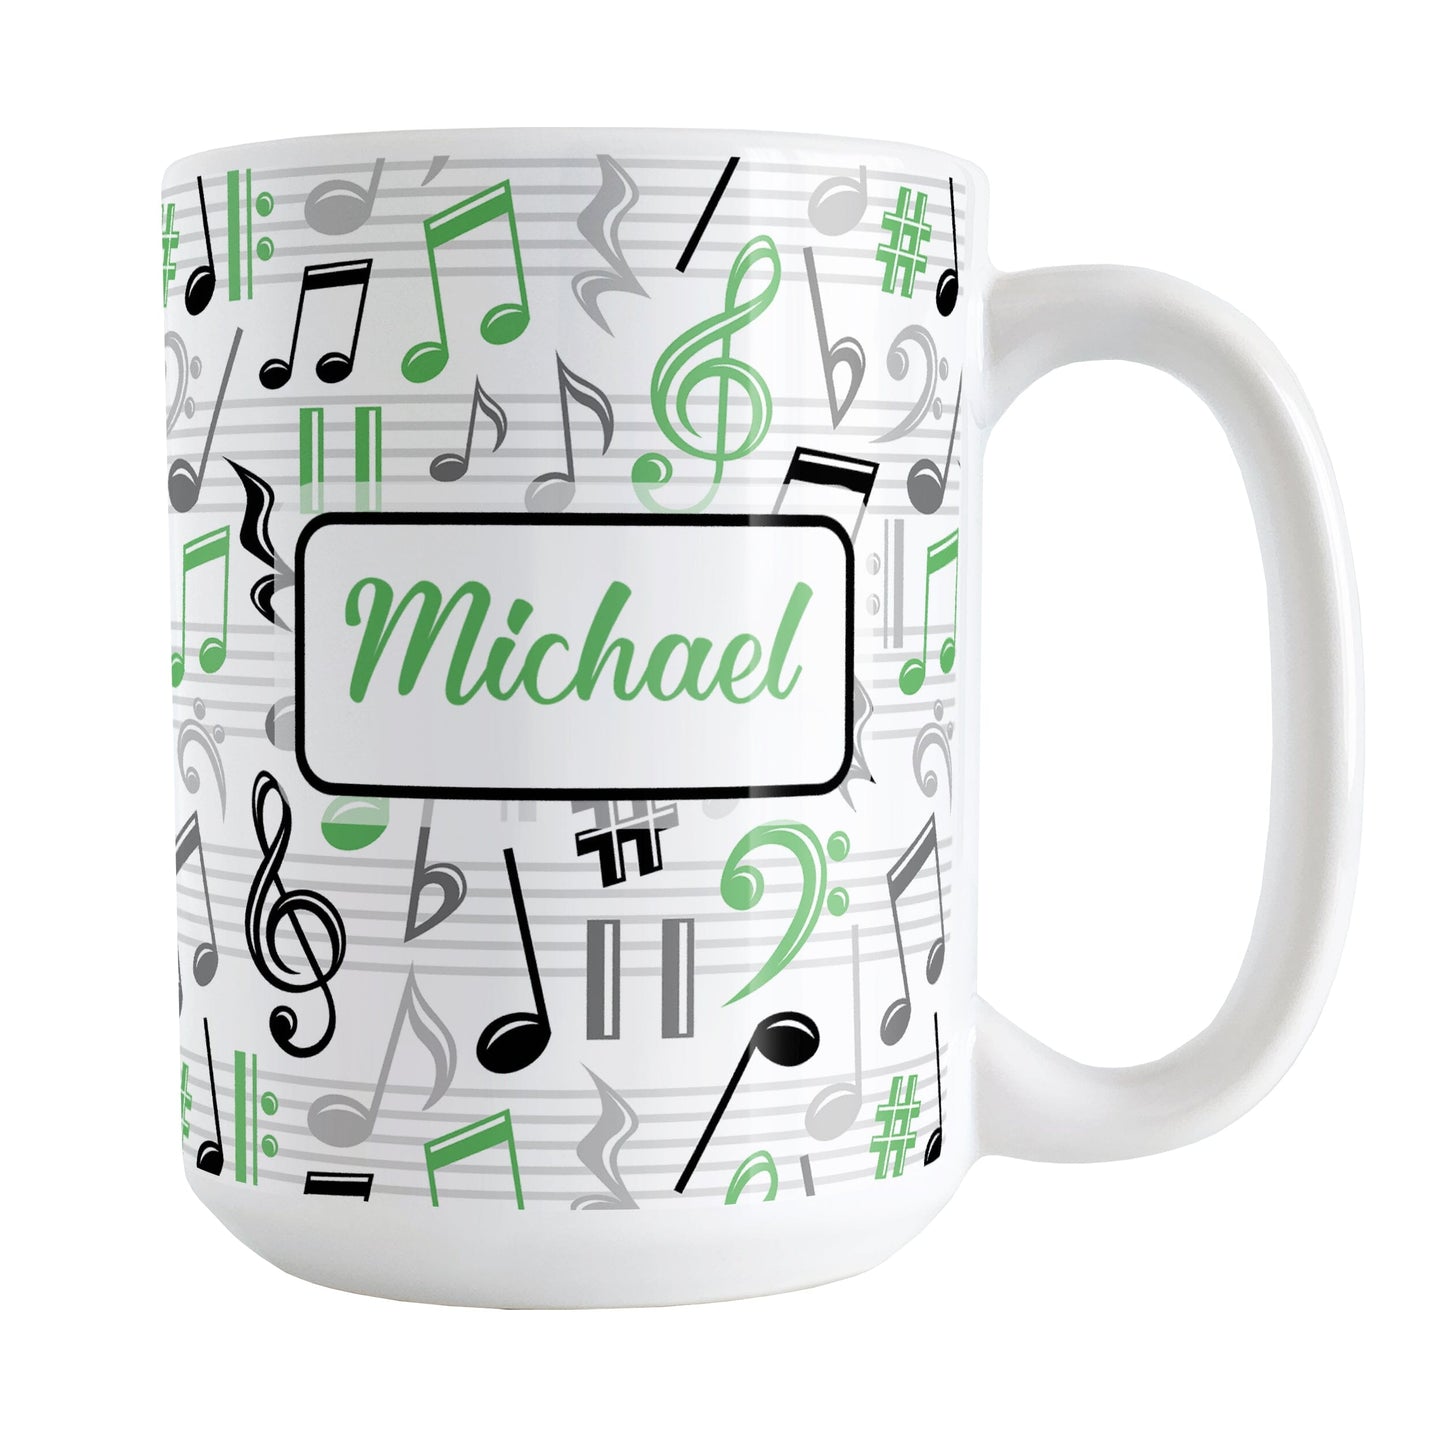 Personalized Green Music Notes Pattern Mug (15oz) at Amy's Coffee Mugs. A ceramic coffee mug designed with music notes and symbols in green, black, and gray in a pattern that wraps around the mug to the handle. Your personalized name is custom printed in a green script font on white over the music pattern design on both sides of the mug.